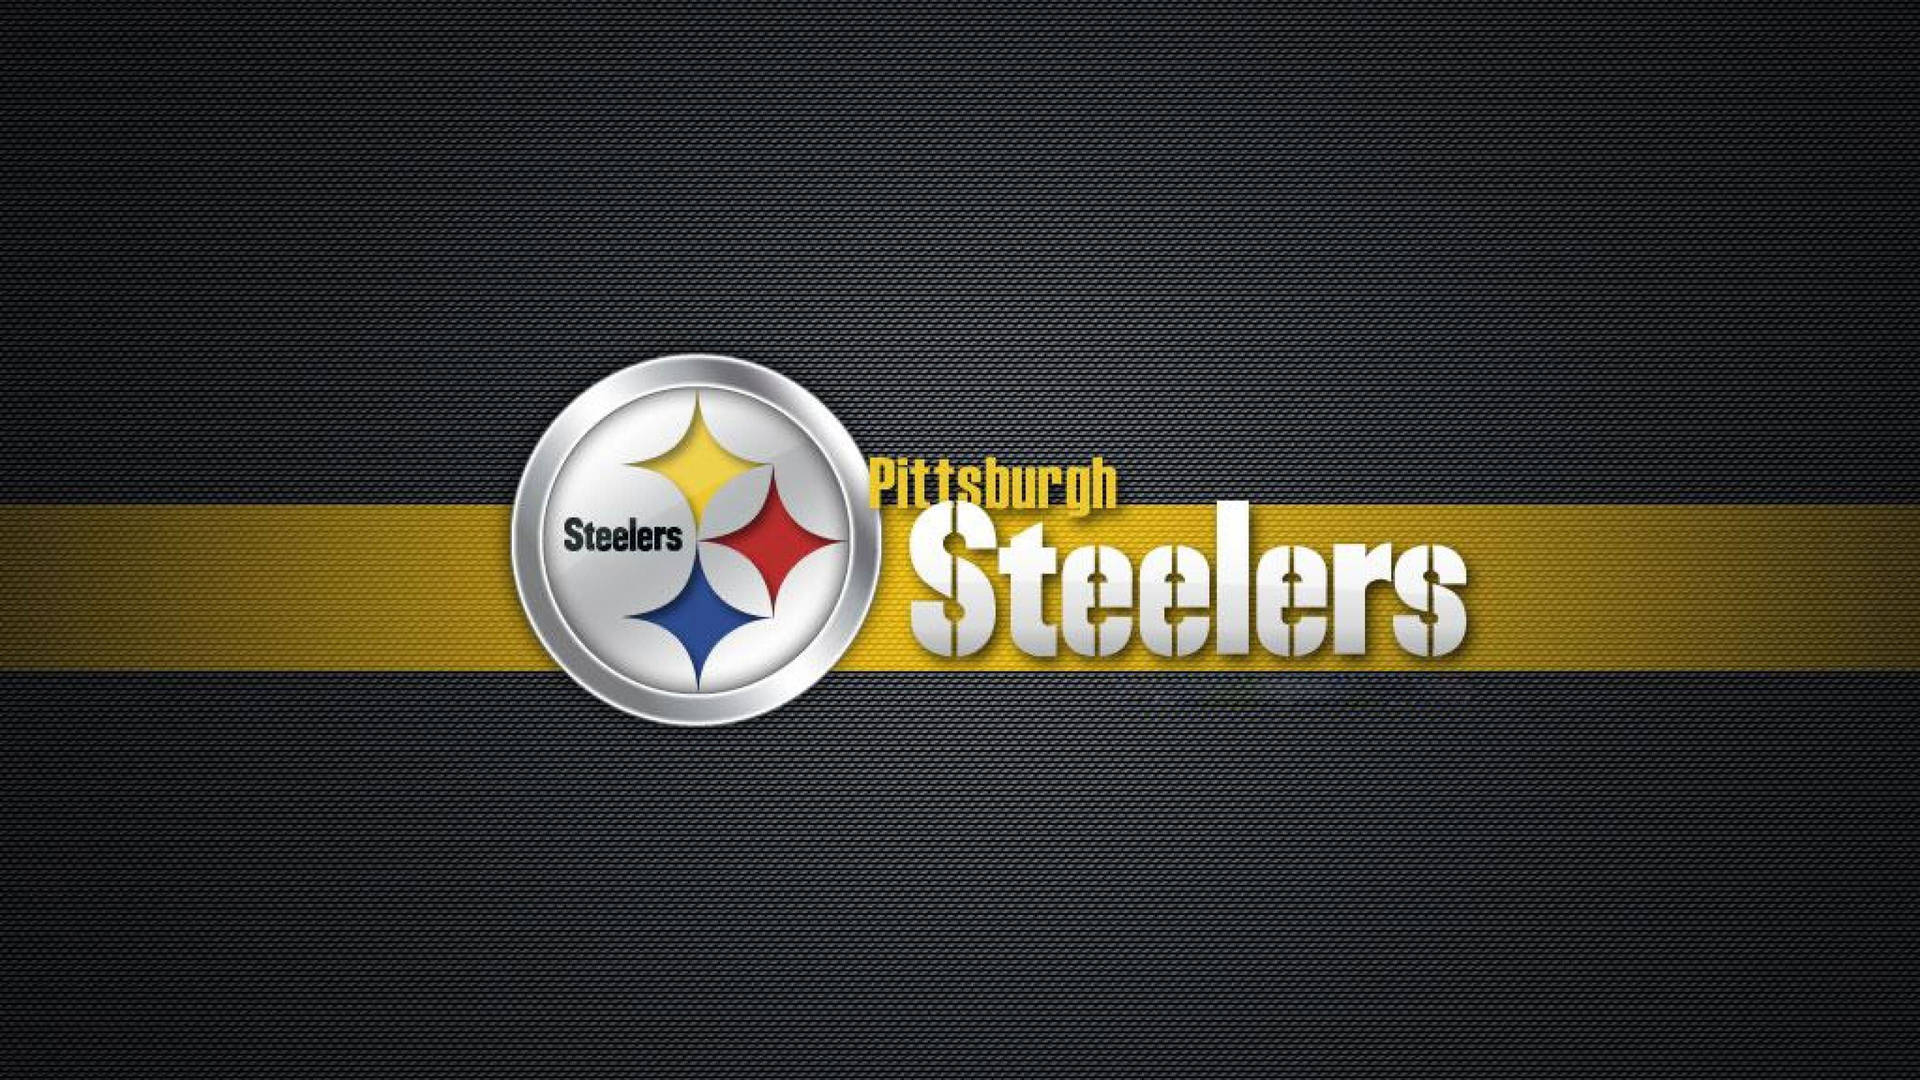 Pittsburgh Steelers Nfl Football Poster